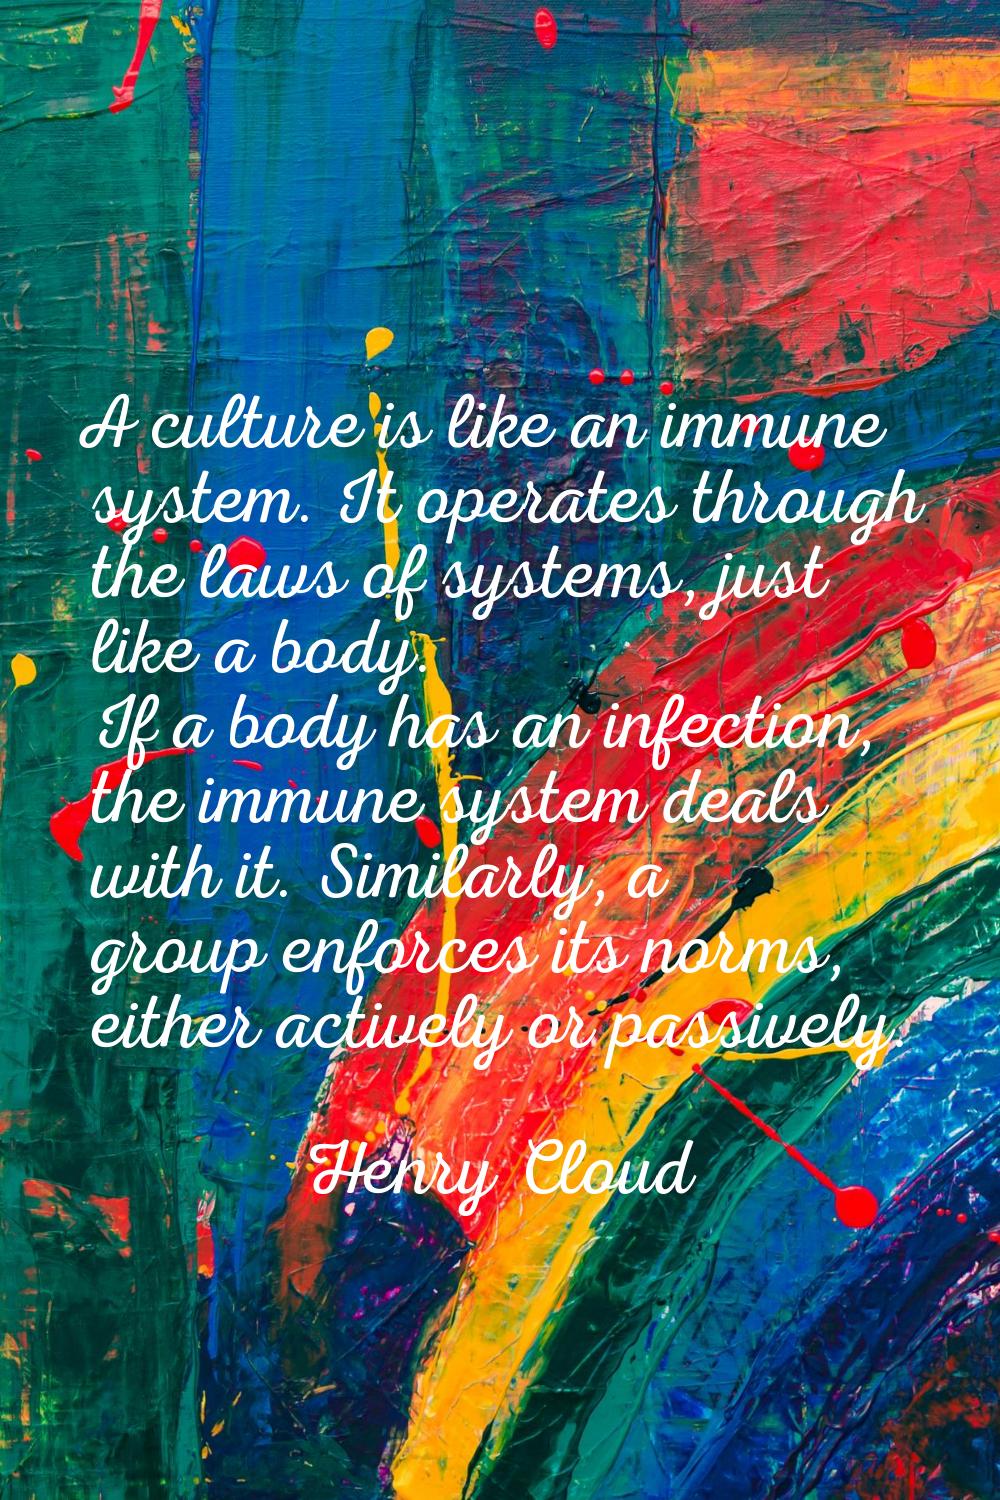 A culture is like an immune system. It operates through the laws of systems, just like a body. If a